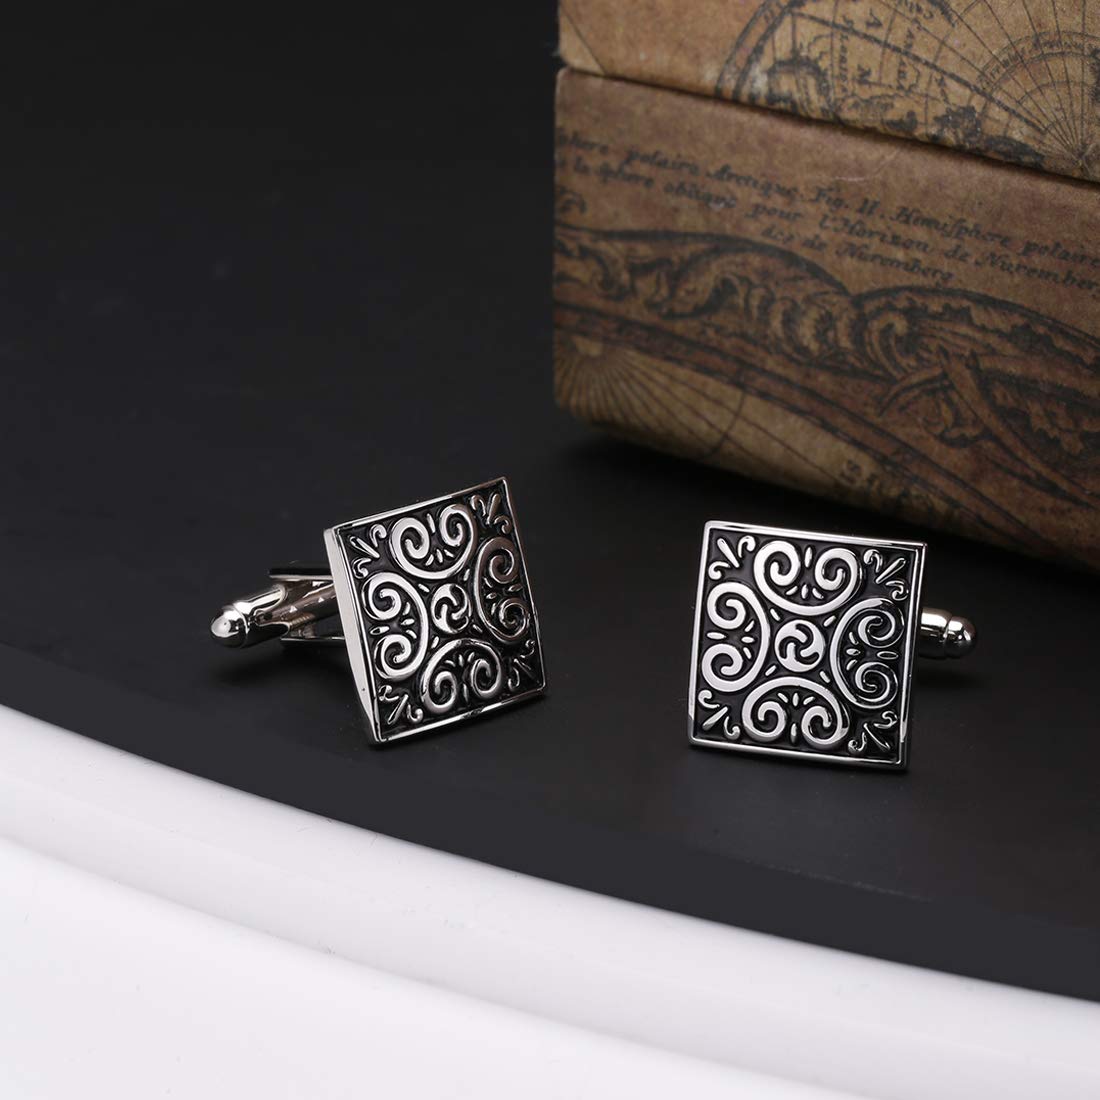 Yellow Chimes Cufflinks for Men Cuff links Stainless Steel Black Square Cufflinks for Men and Boy's.